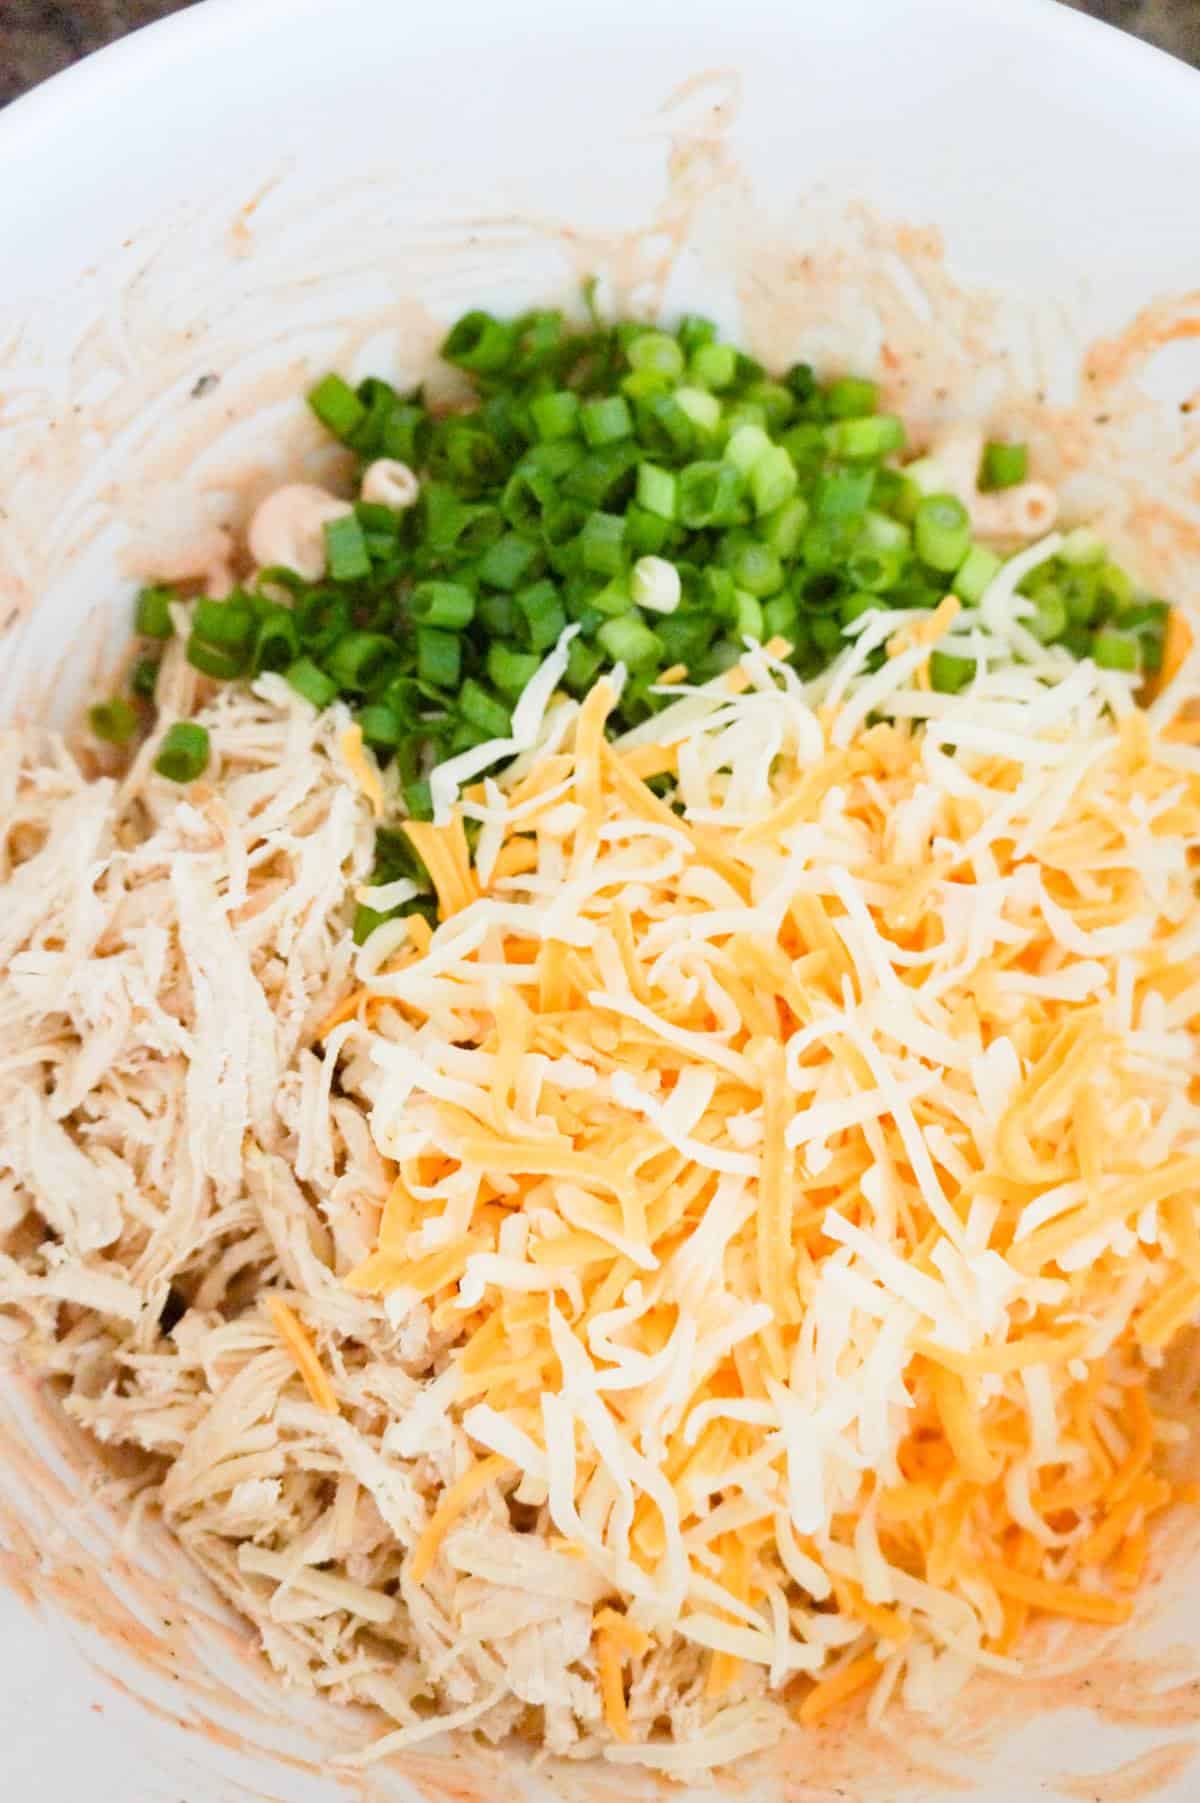 shredded cheese, shredded chicken and chopped green onions on top of pasta in a mixing bowl